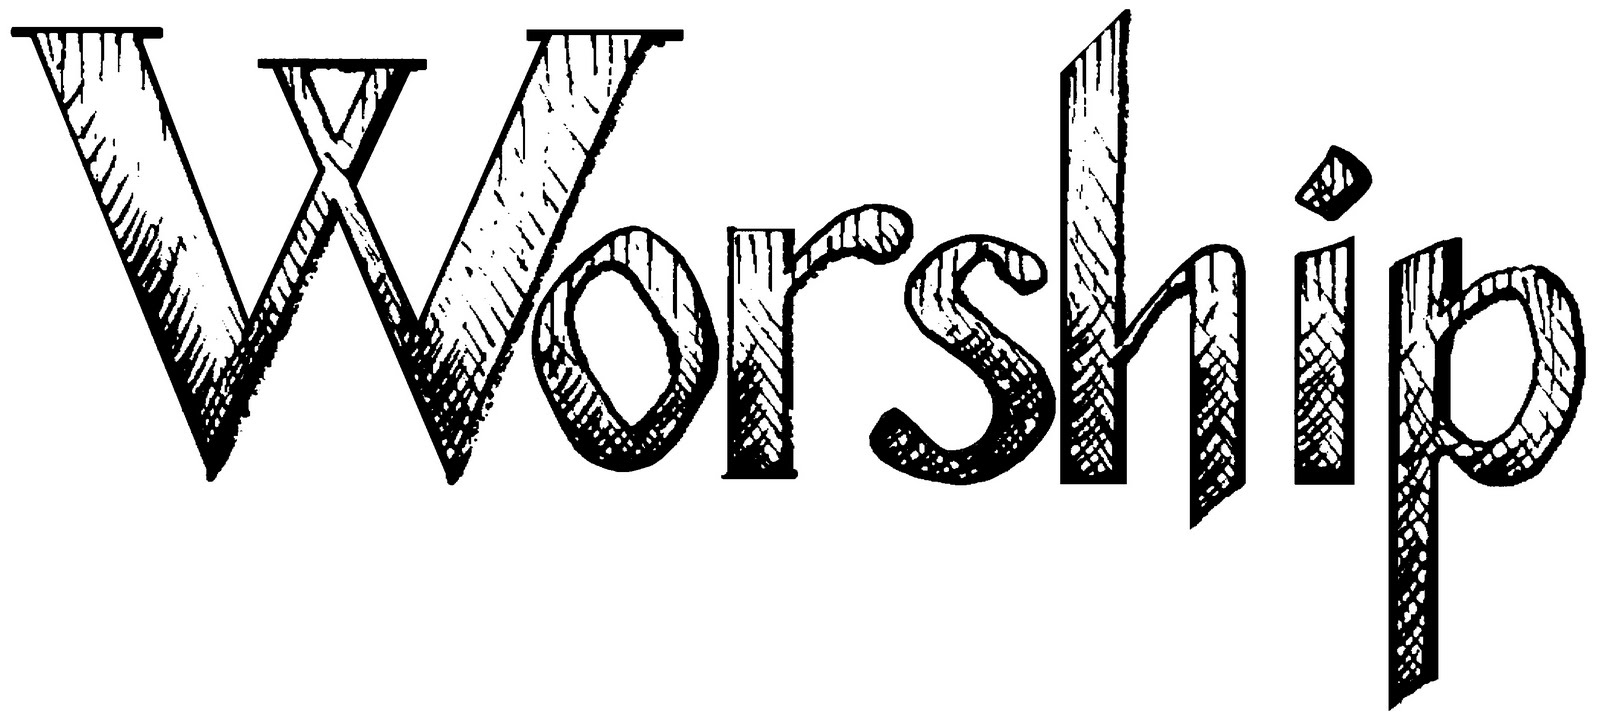 Welcome to worship clipart